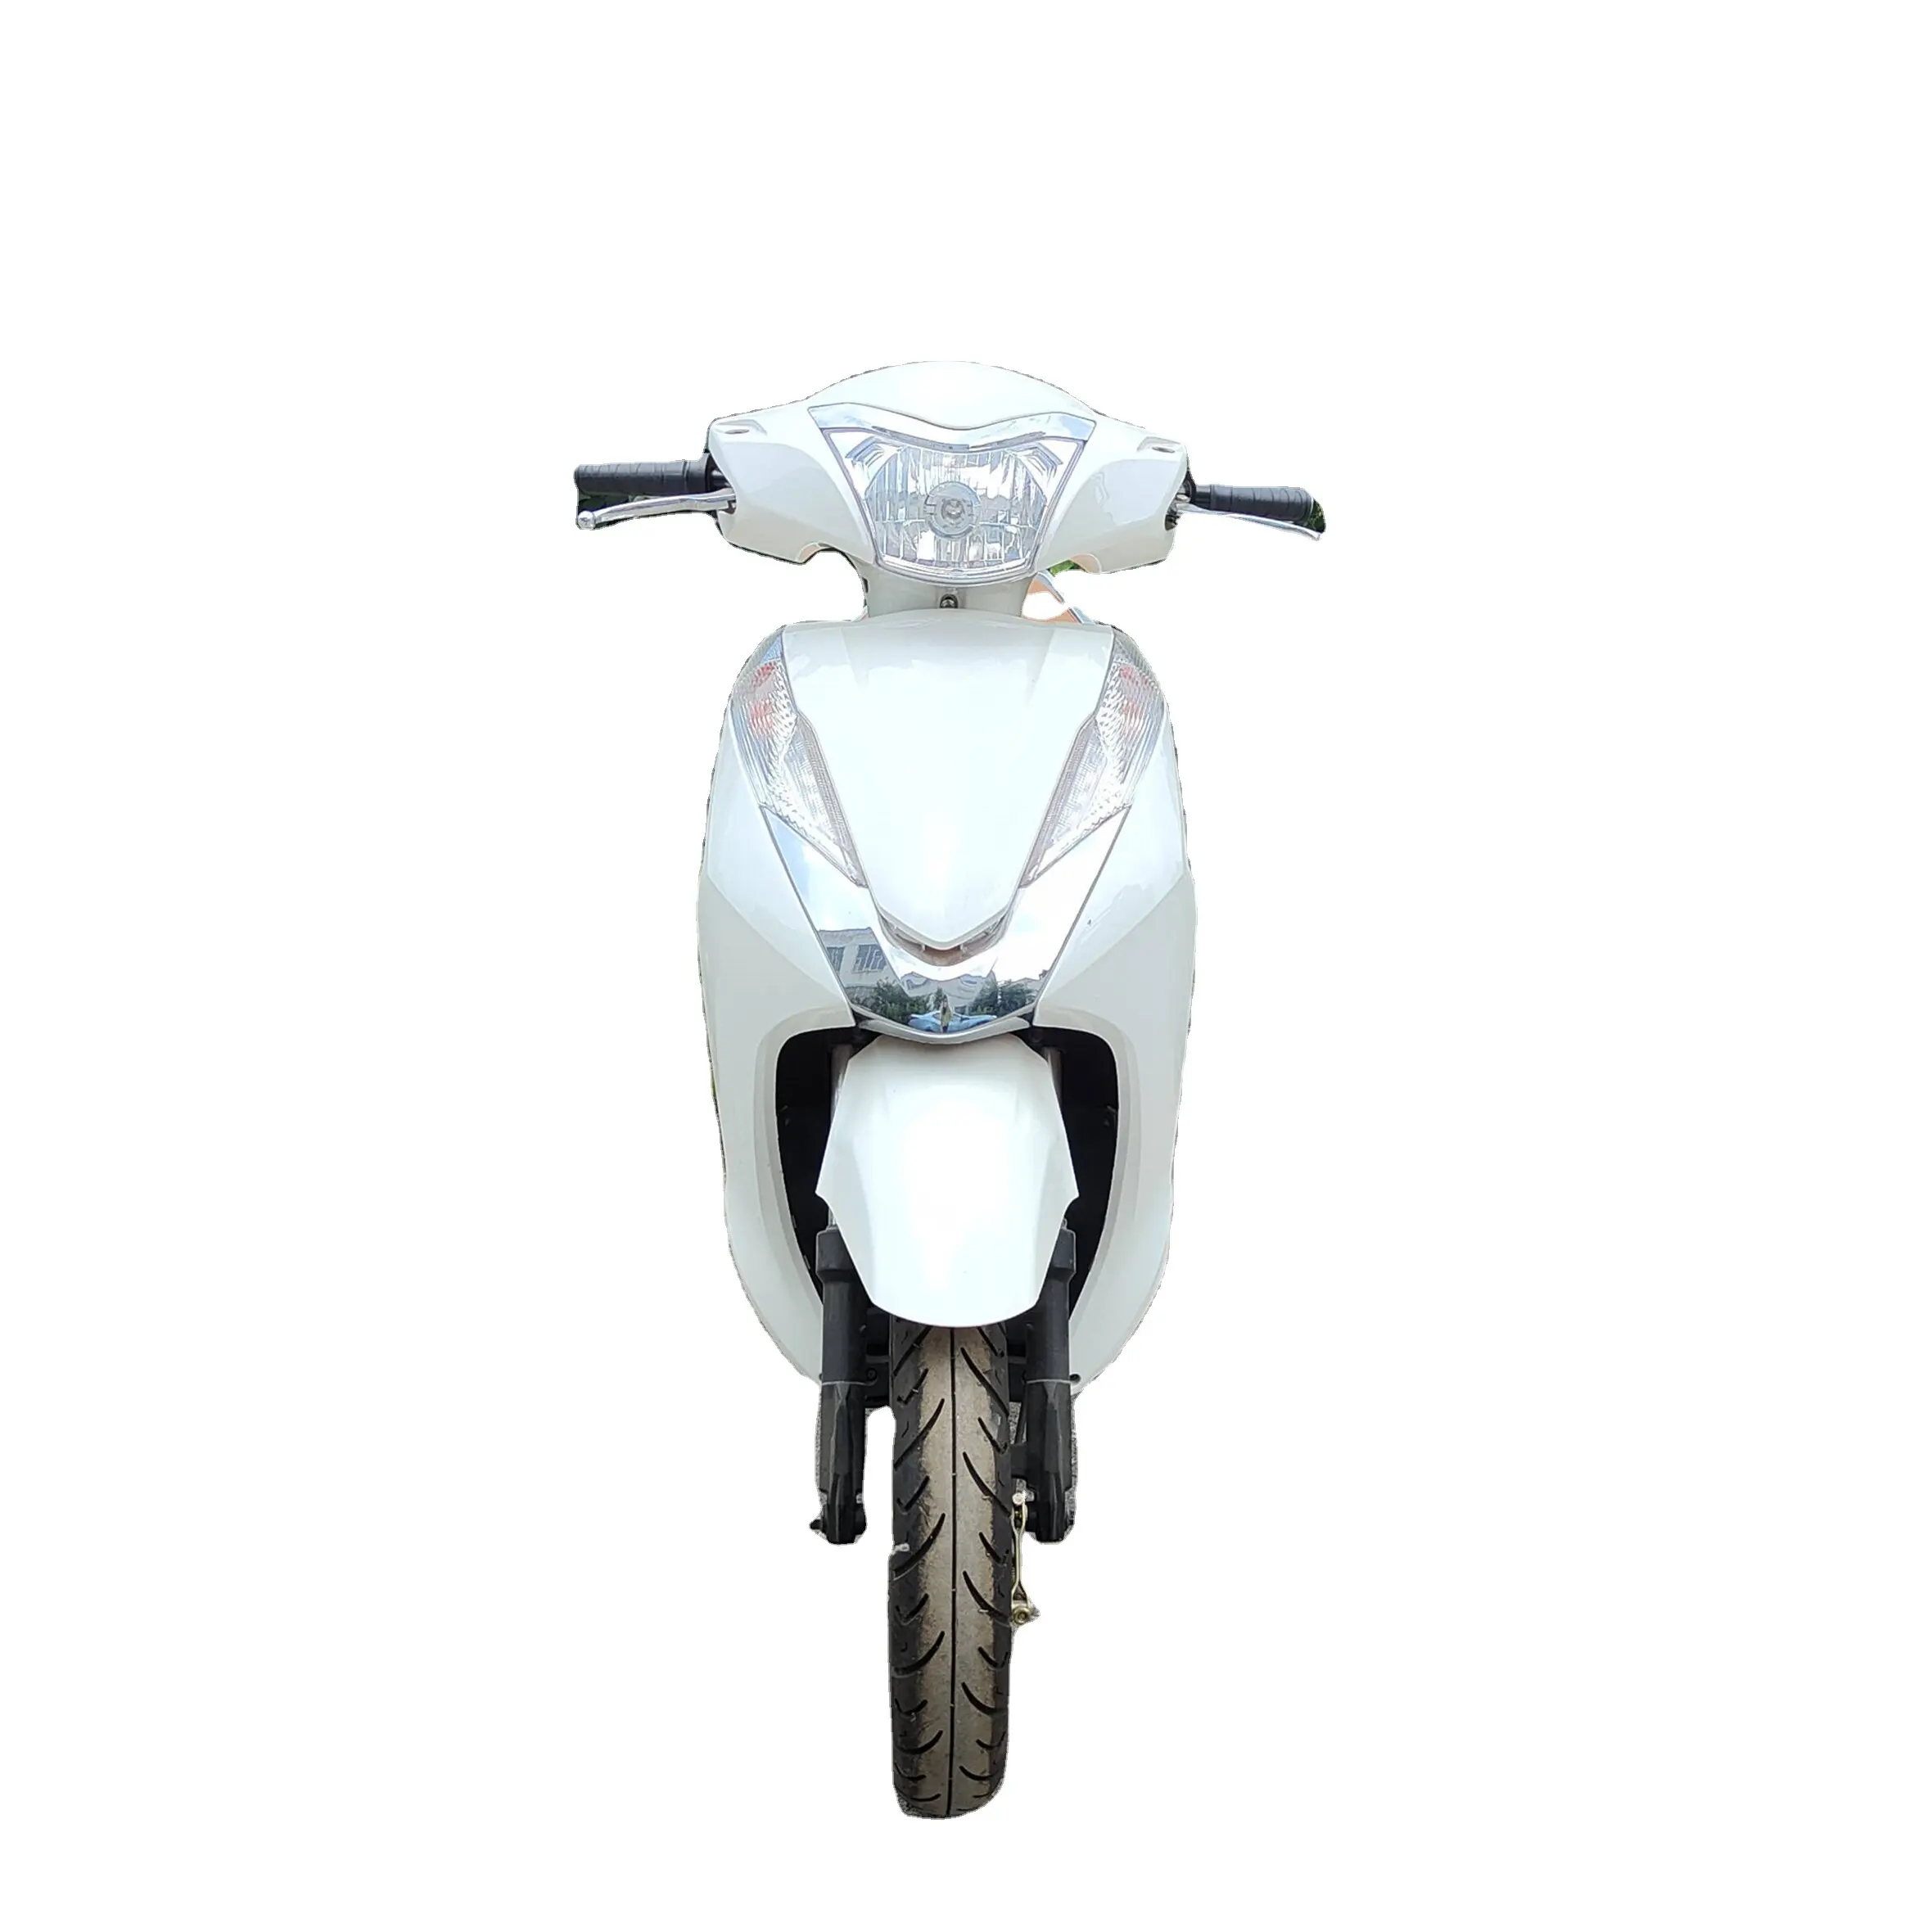 Hot sale in India CKD cheap price electric scooters electric motorcycle 2 wheel electric bike bicycle for sale